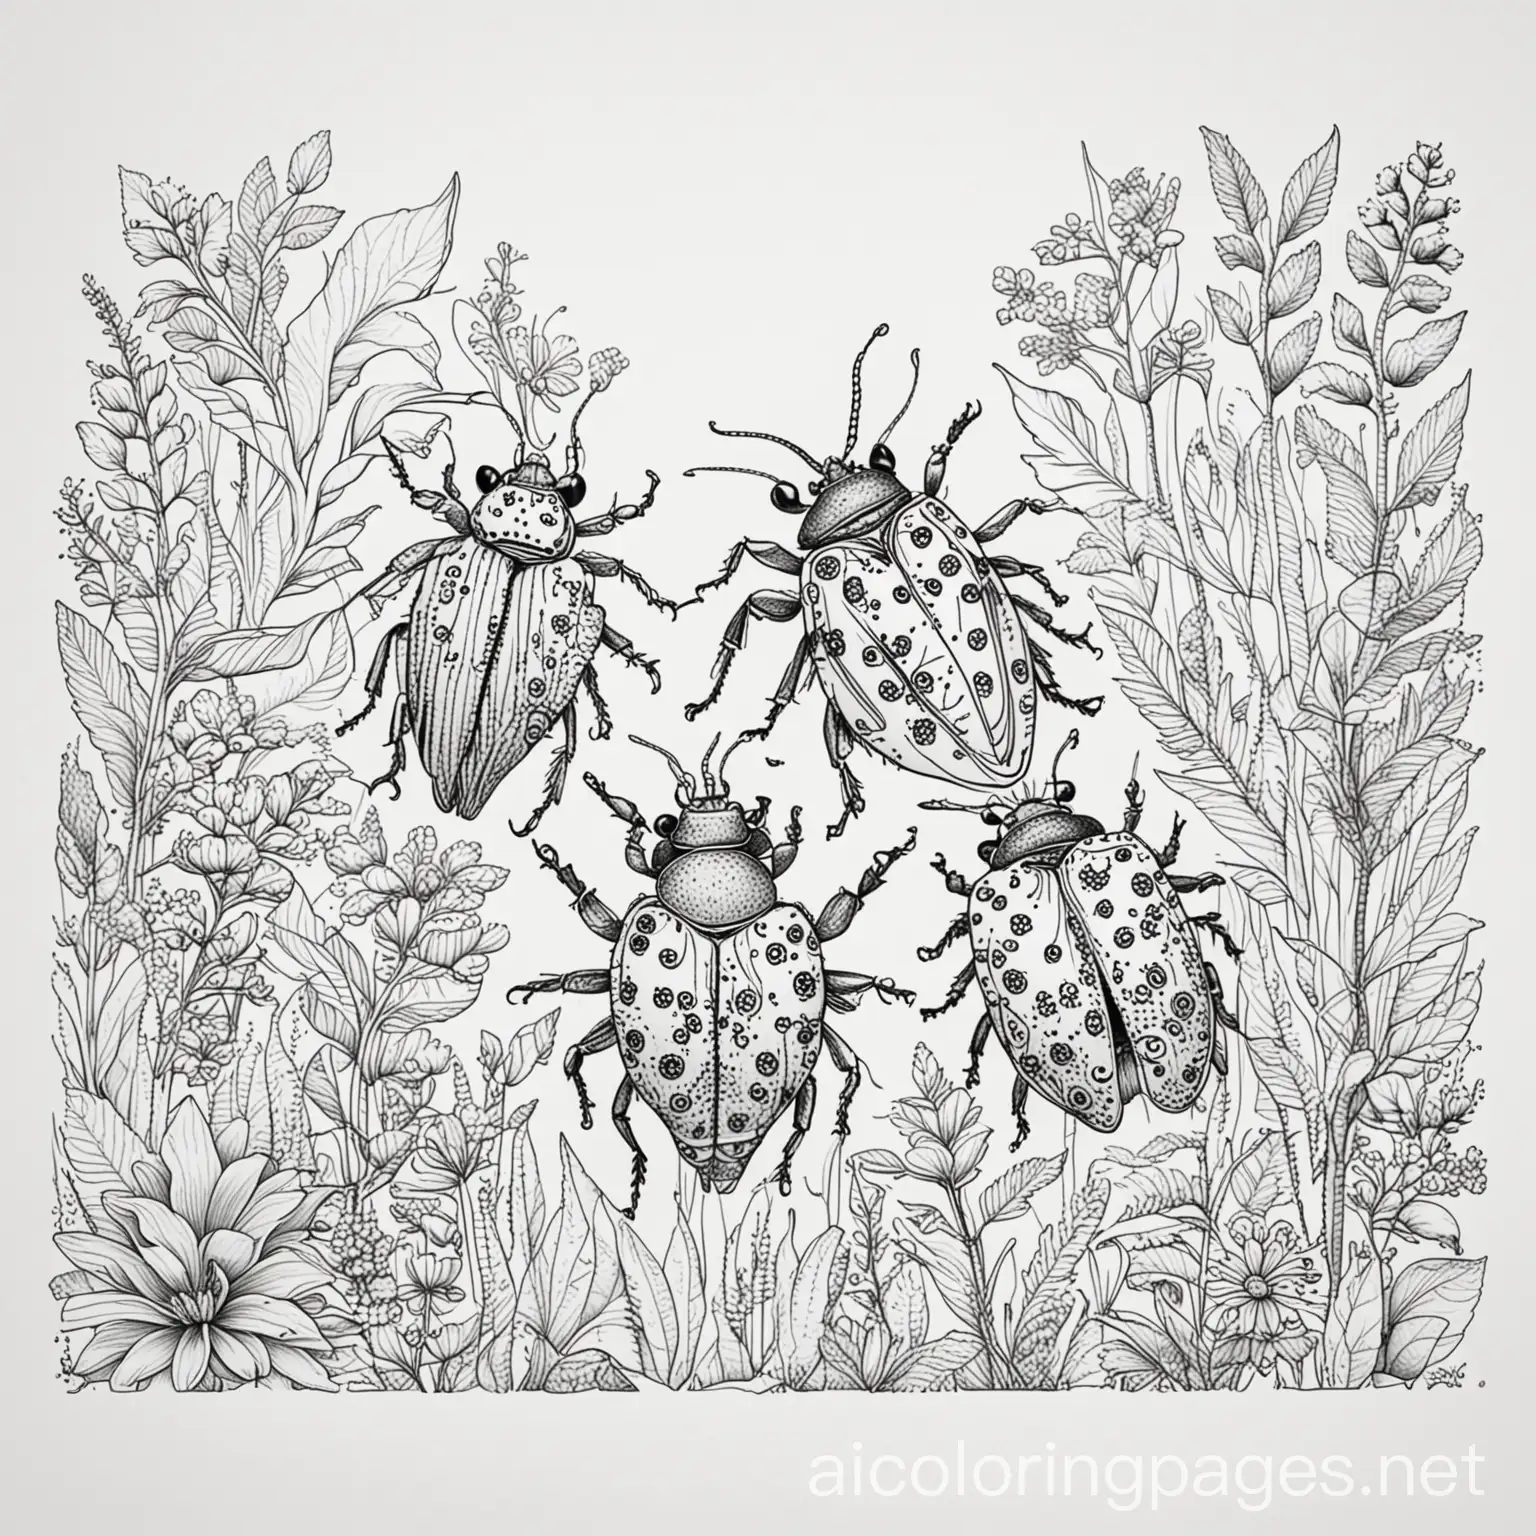 Spring-Bugs-Coloring-Page-Simplistic-Line-Art-on-White-Background